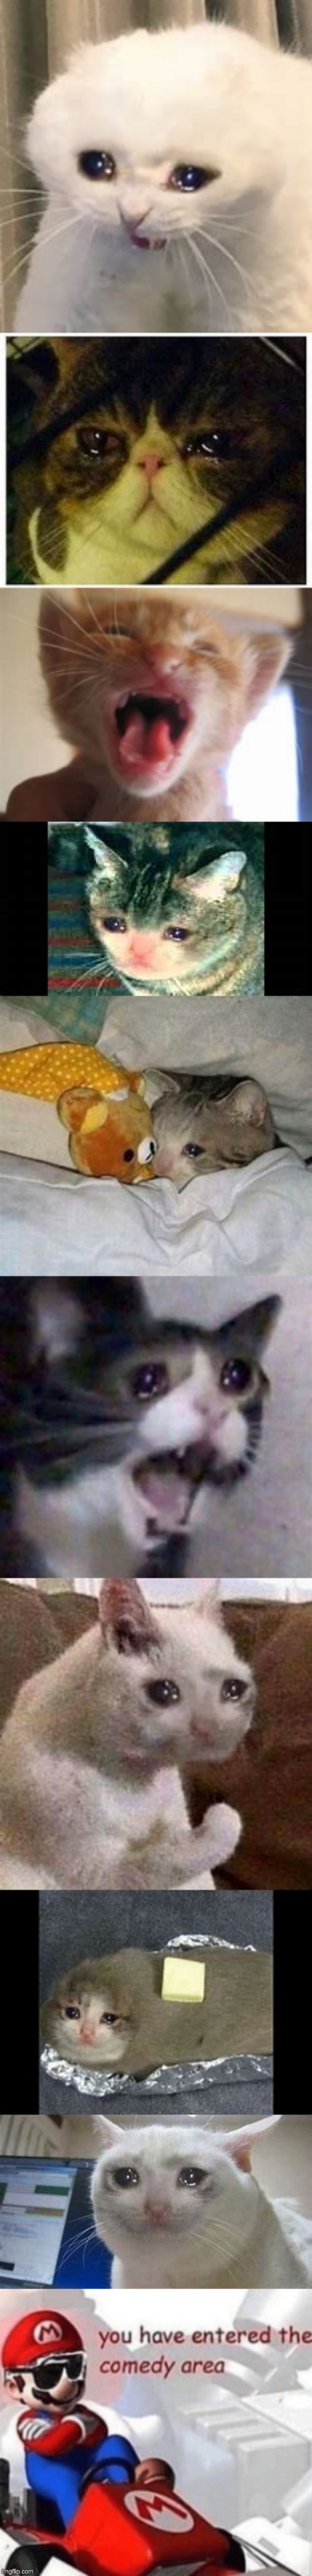 crying cats ur welcome | image tagged in memes,long,cats,comedy area,butter | made w/ Imgflip meme maker